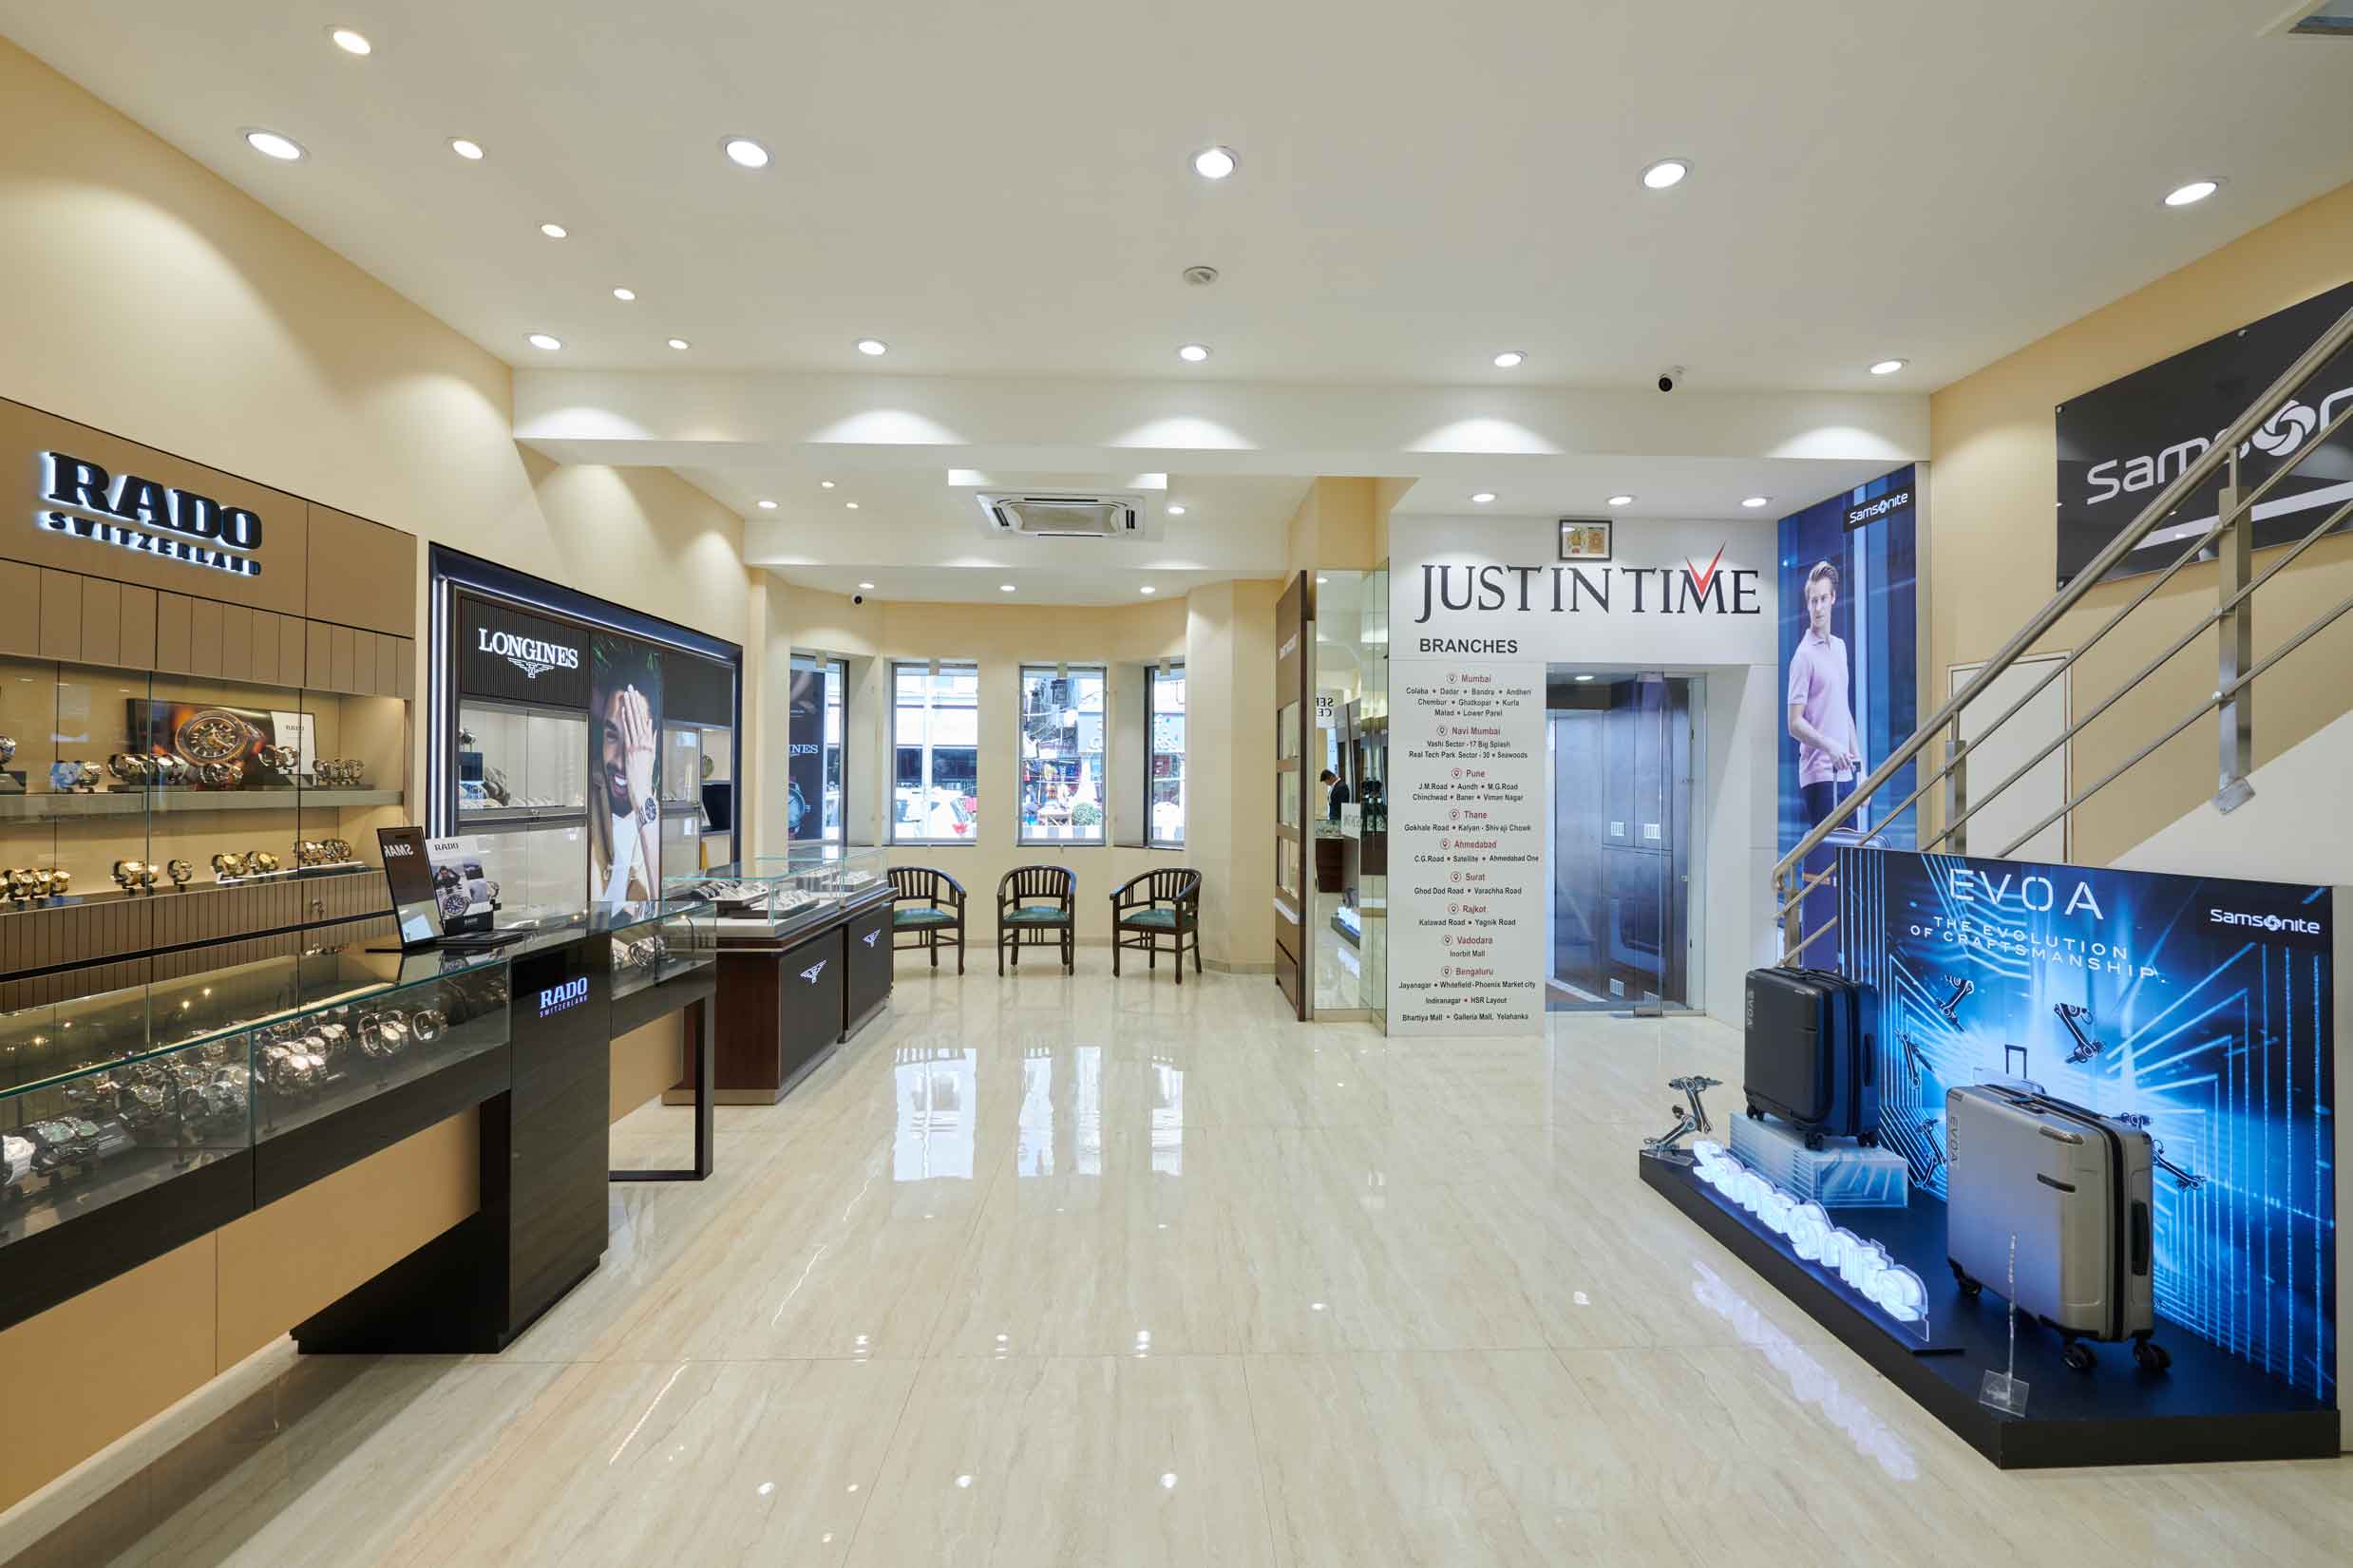 RADO, Logines watches display in left- Inside the store